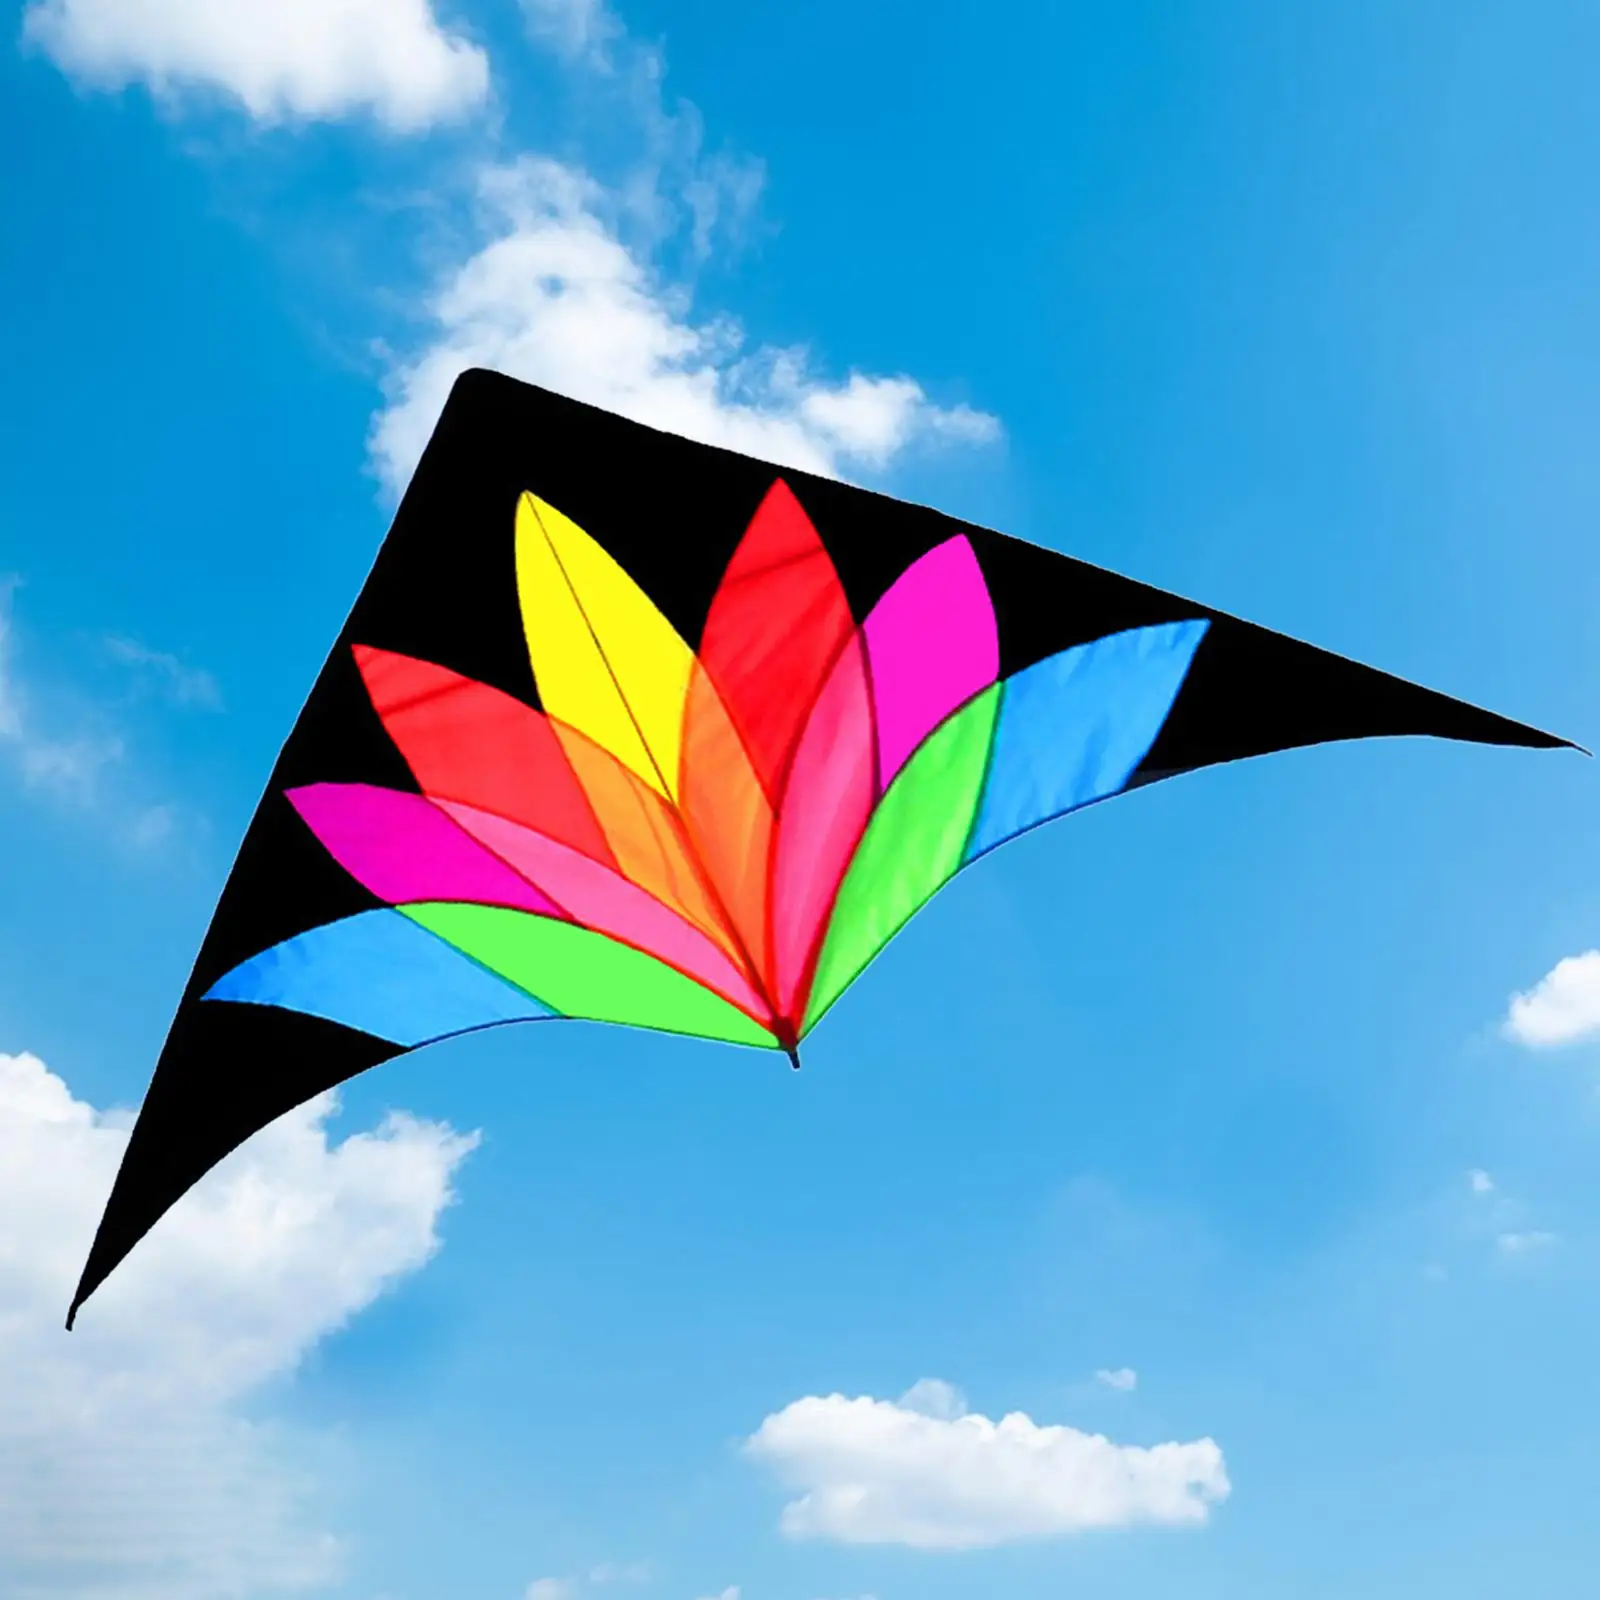 Large Delta Beach Kite Durable Easy to Fly Large Giant Kites Huge Kite for Adults for Park Outdoor Lawn Family Parties Backyard